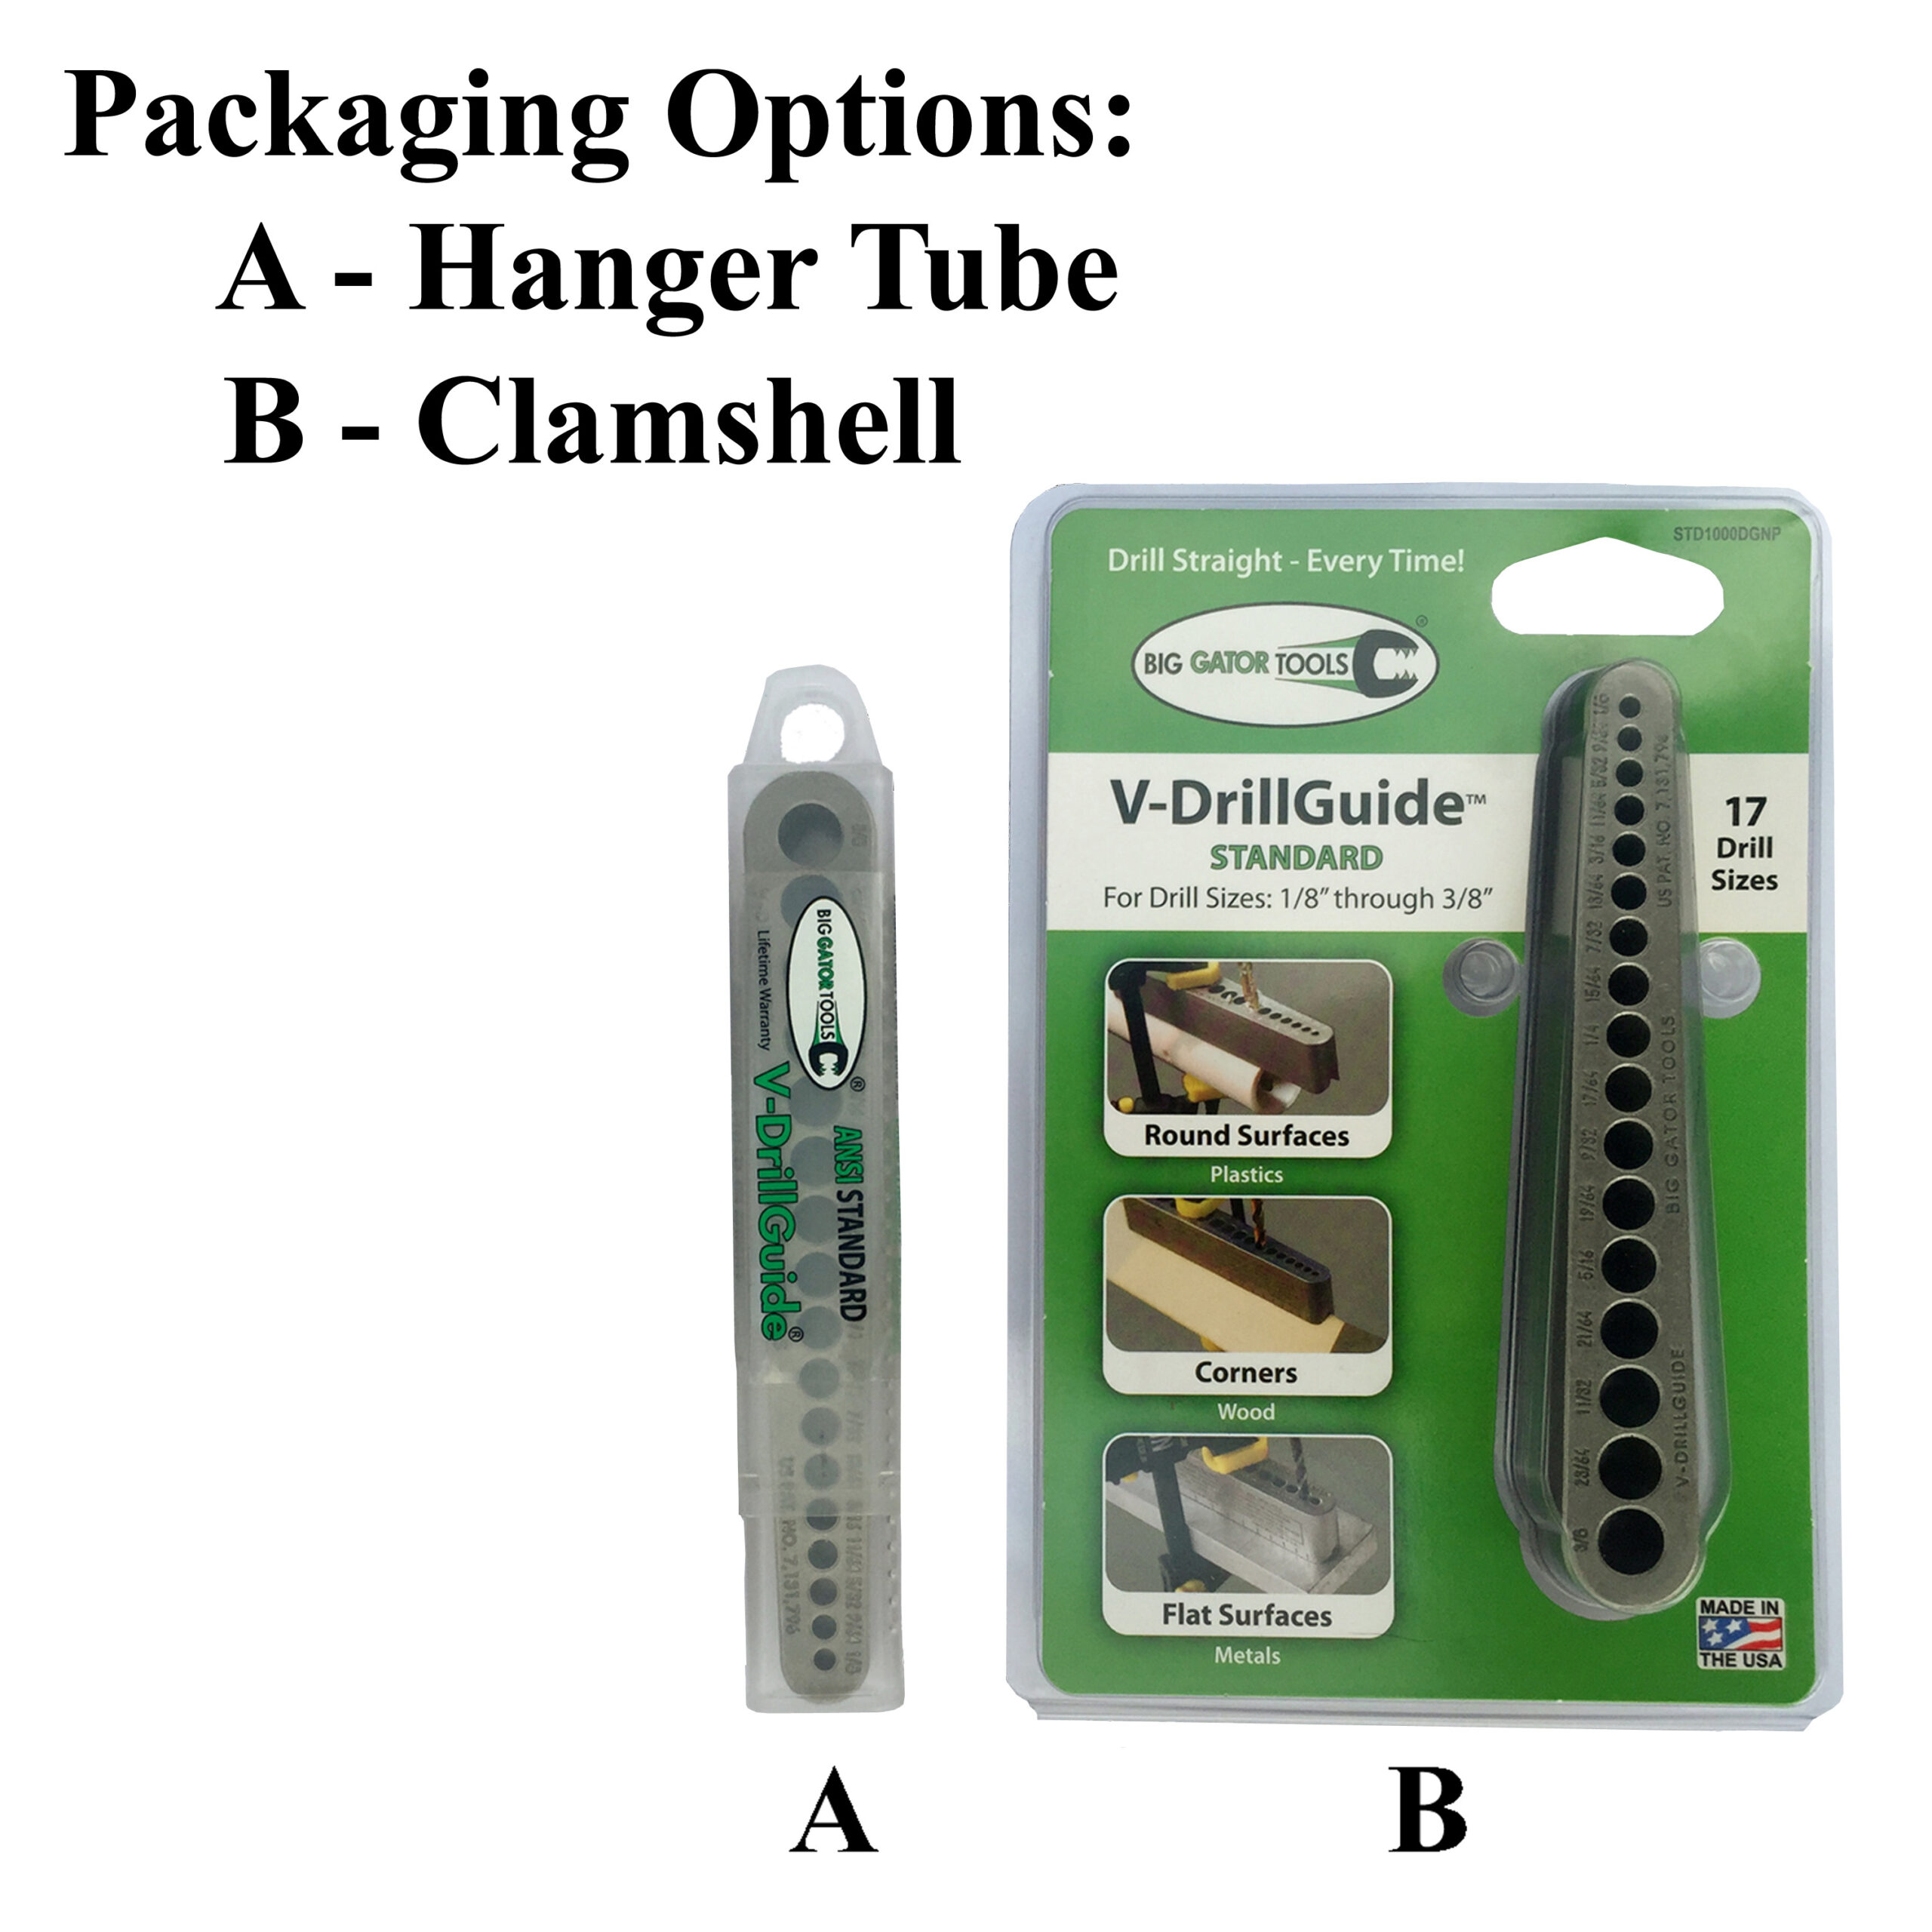 2 Packaging Options copy